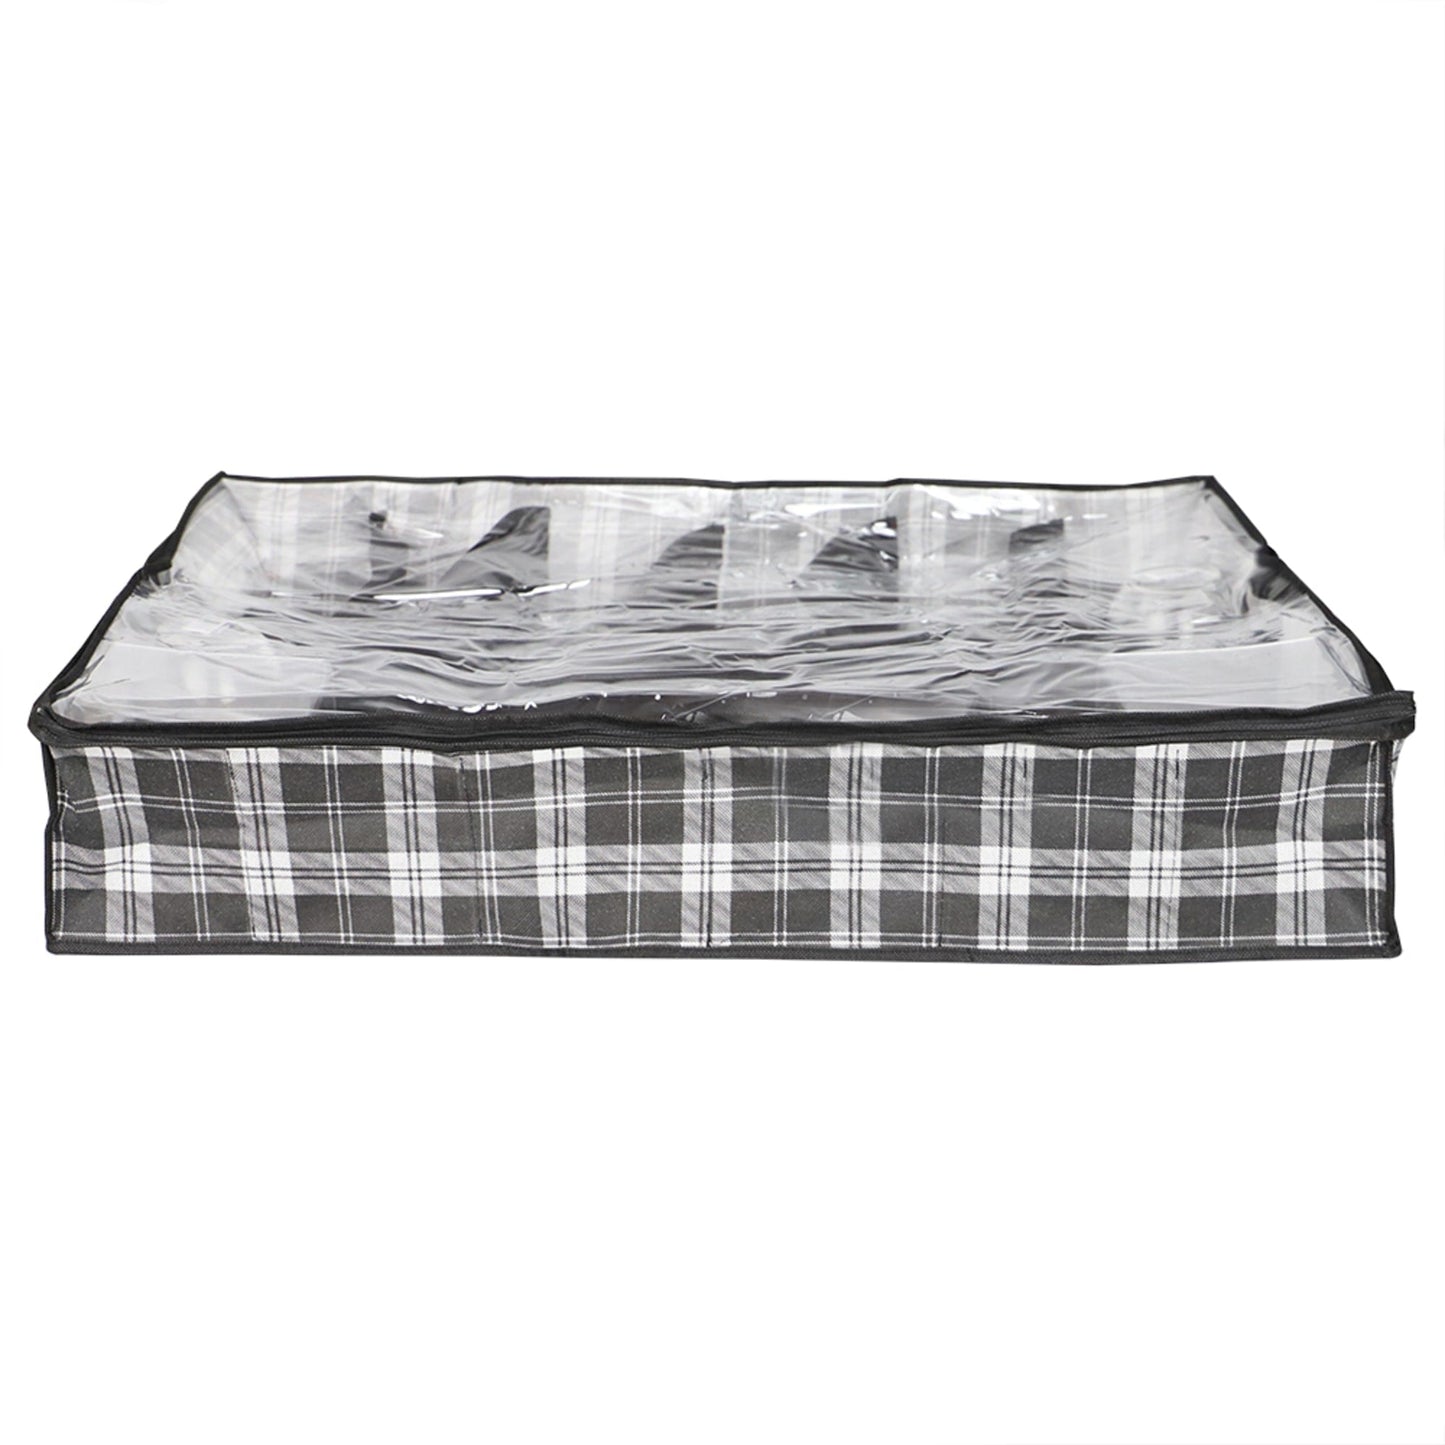 Plaid Non-Woven 12 Pair Under the Bed Shoe Organizer with Clear Top, Black